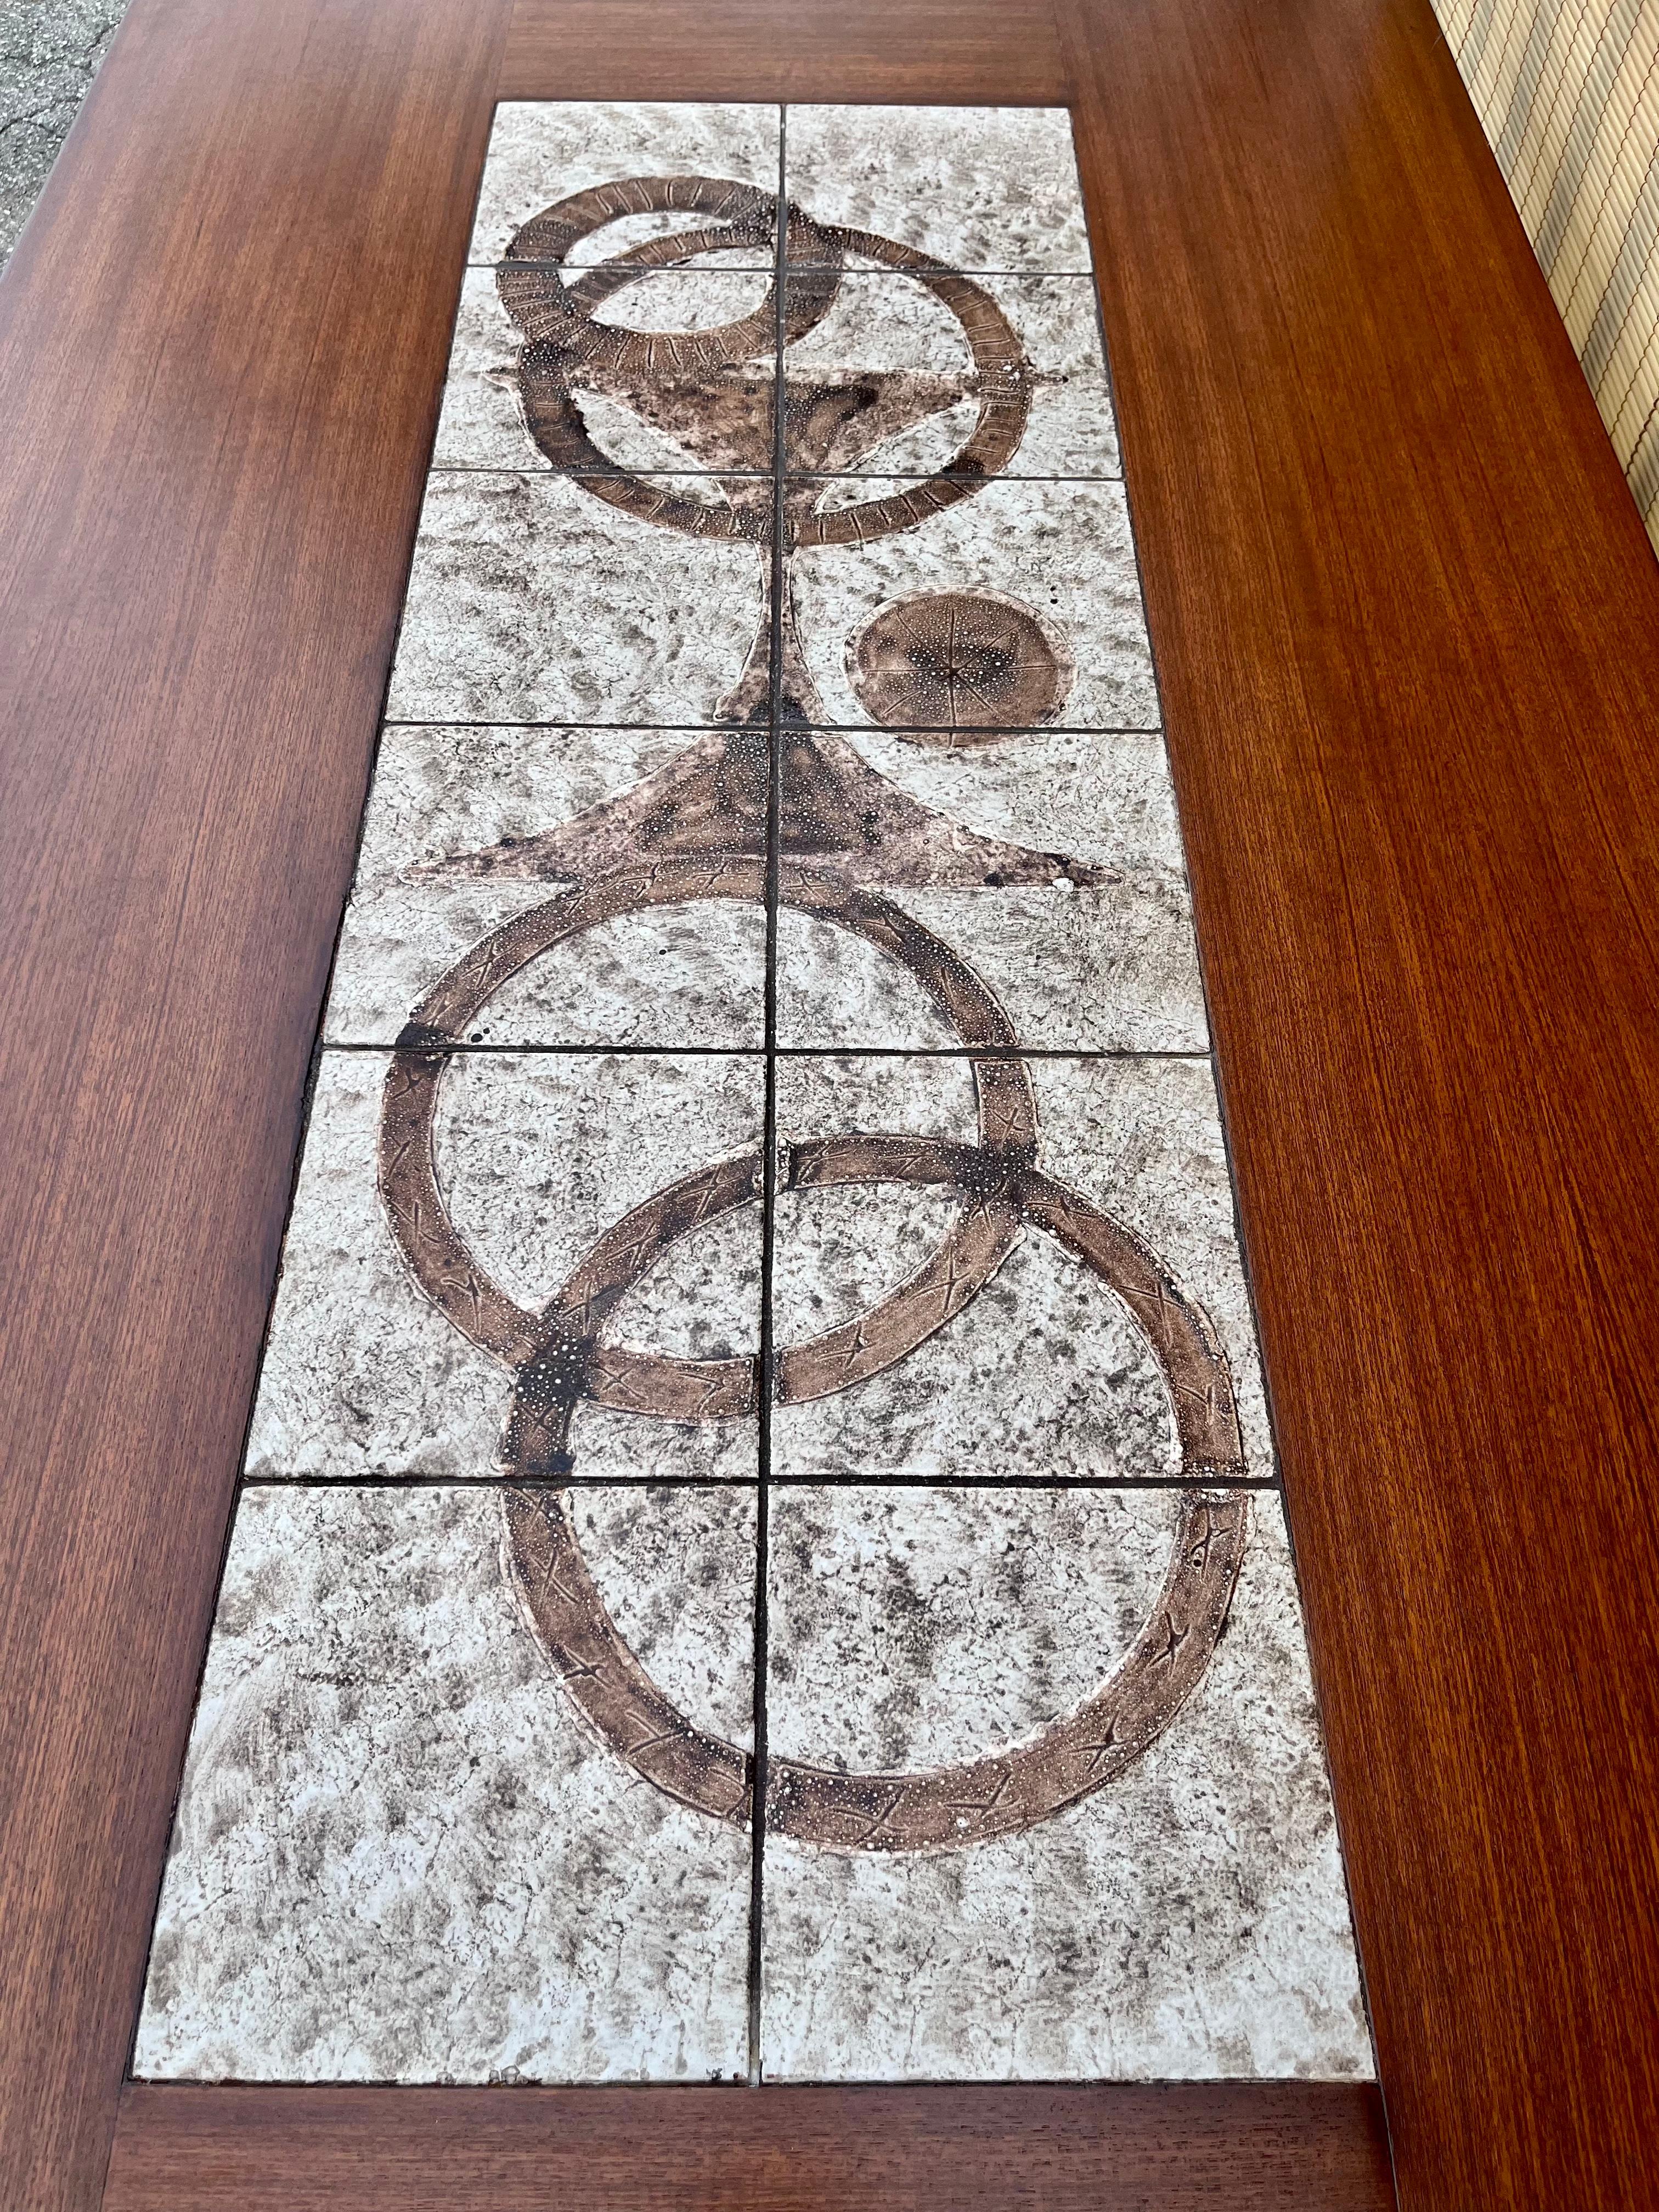 Mid Century Modern Danish Dining Table With Ceramic Tile Inlay. Circa 1970s For Sale 5